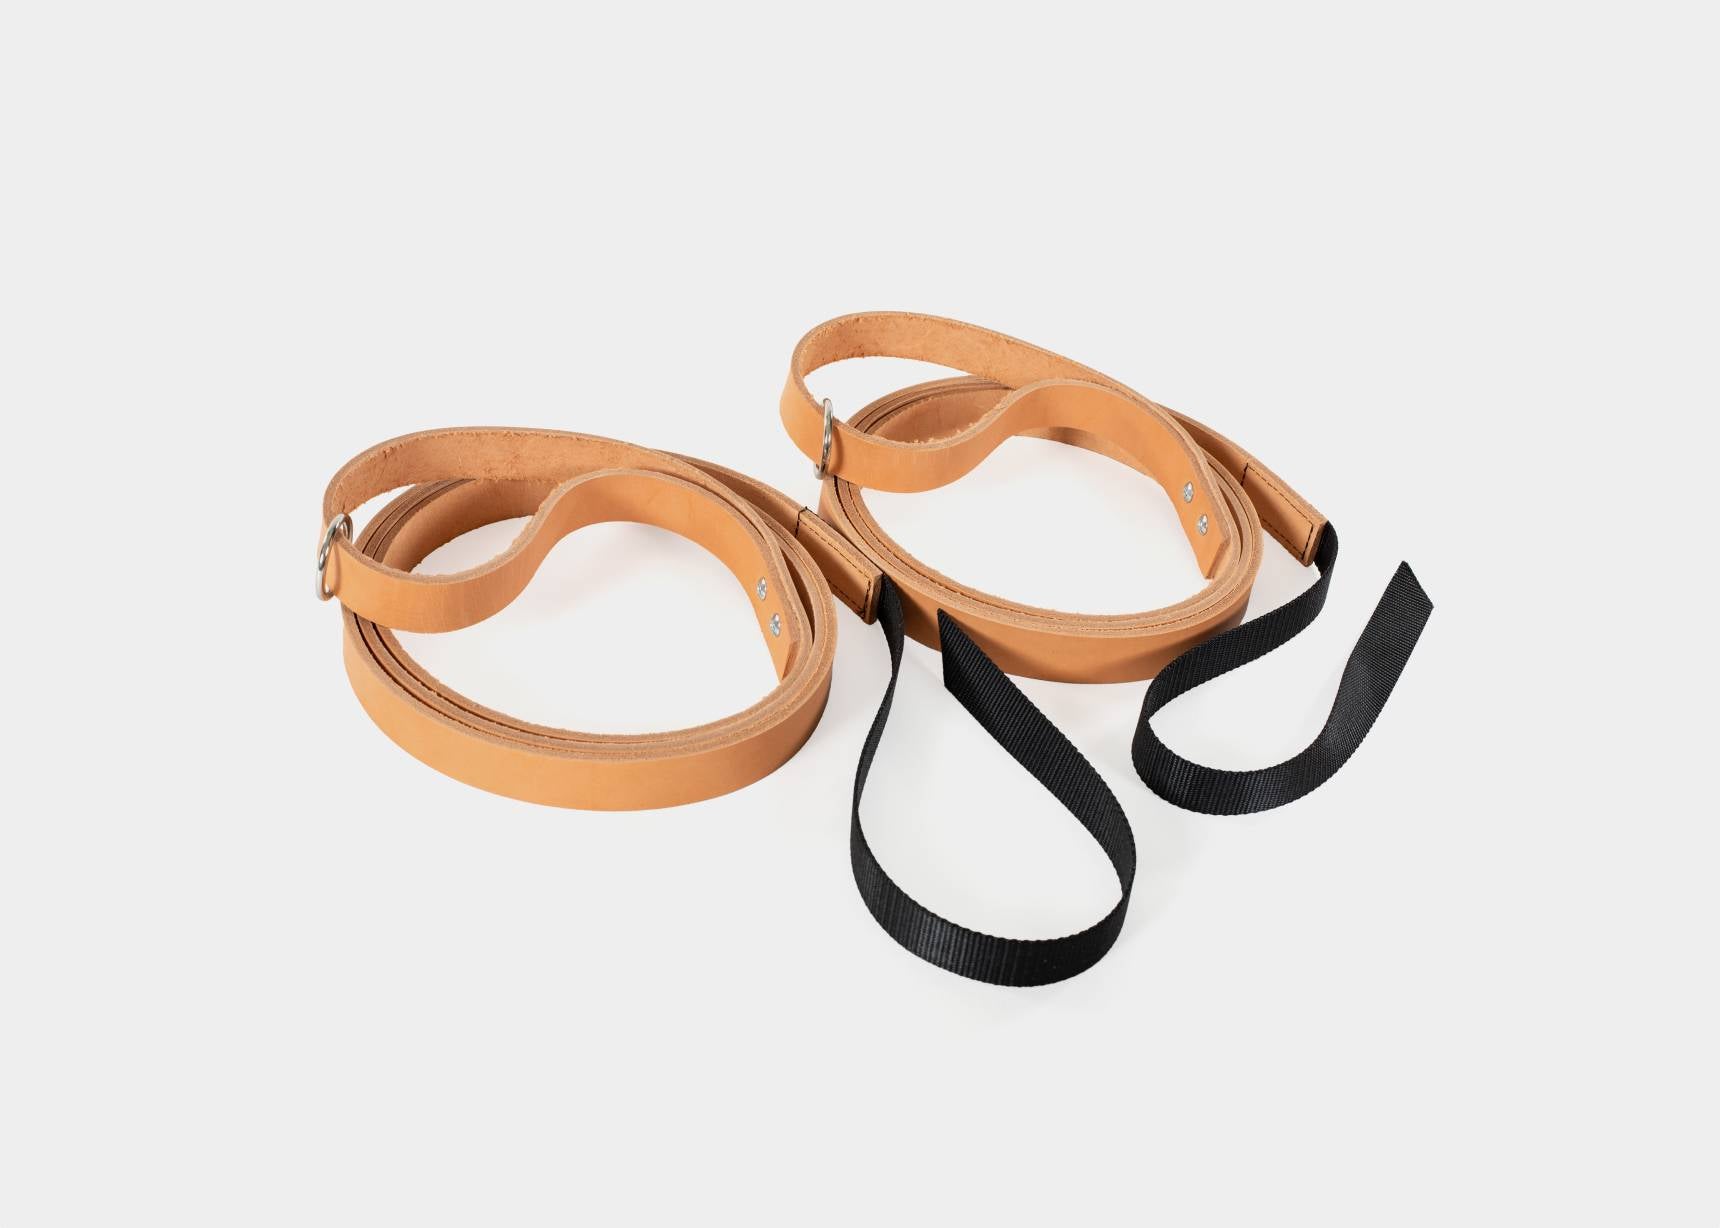 Oak tanned leather Reformer straps for secure grip.